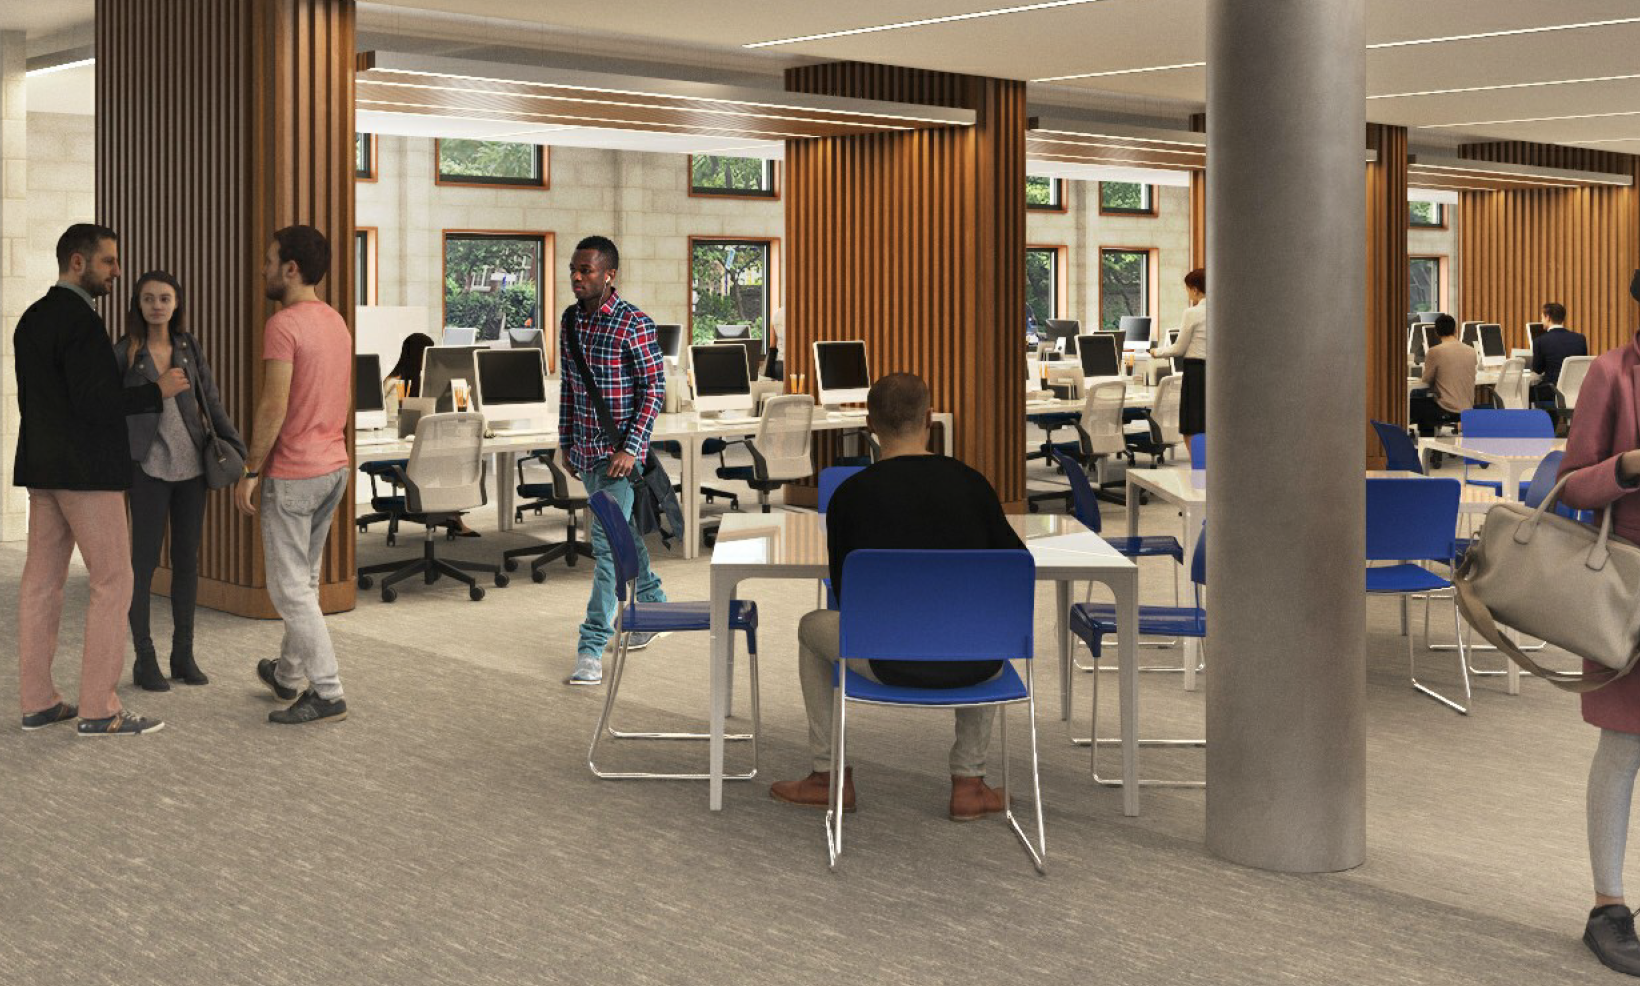 An artist's impression of the updated group study area at Mile End Library